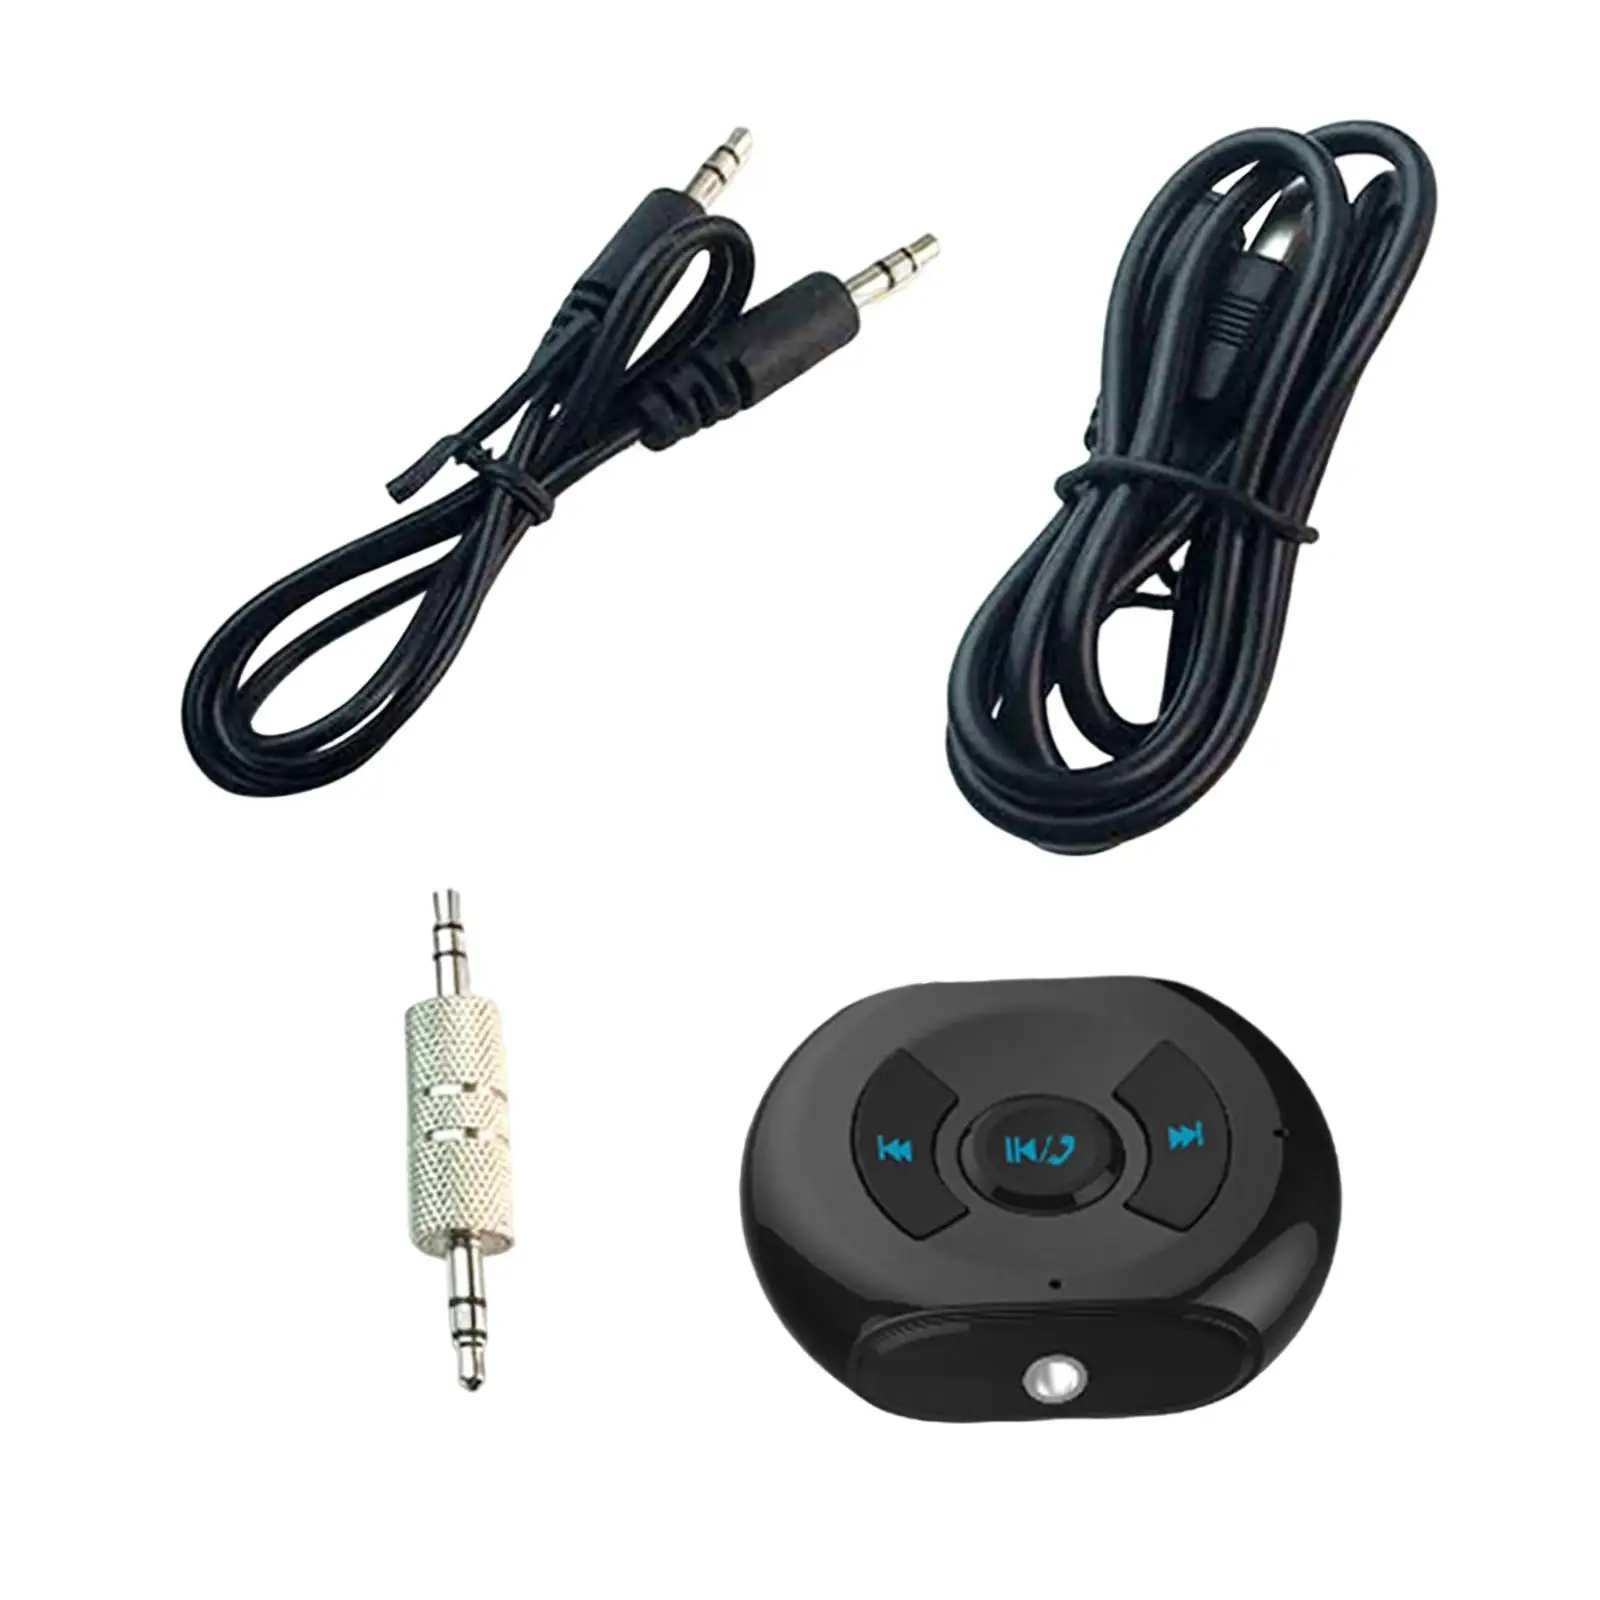 AUX Bluetooth Receiver for Car Music with Audio Cable Lightweight for Home Stereo Hands Free Calls Easy to Carry Auto Reconnect